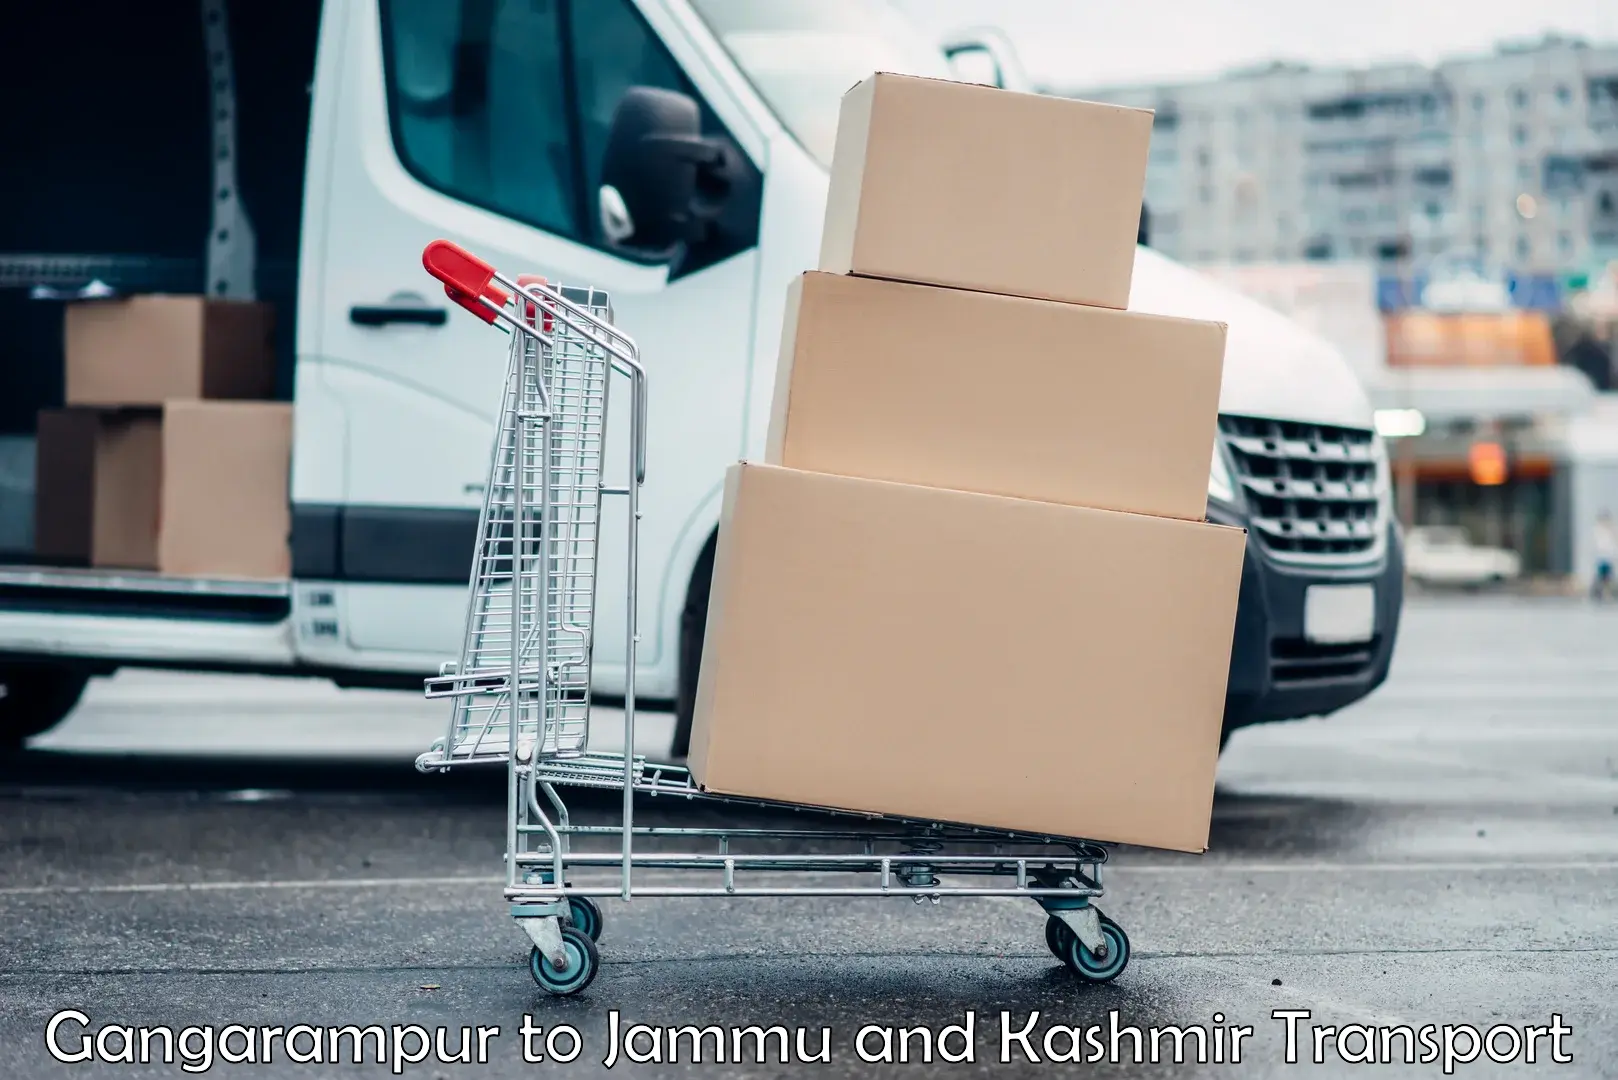 Daily parcel service transport in Gangarampur to Baramulla